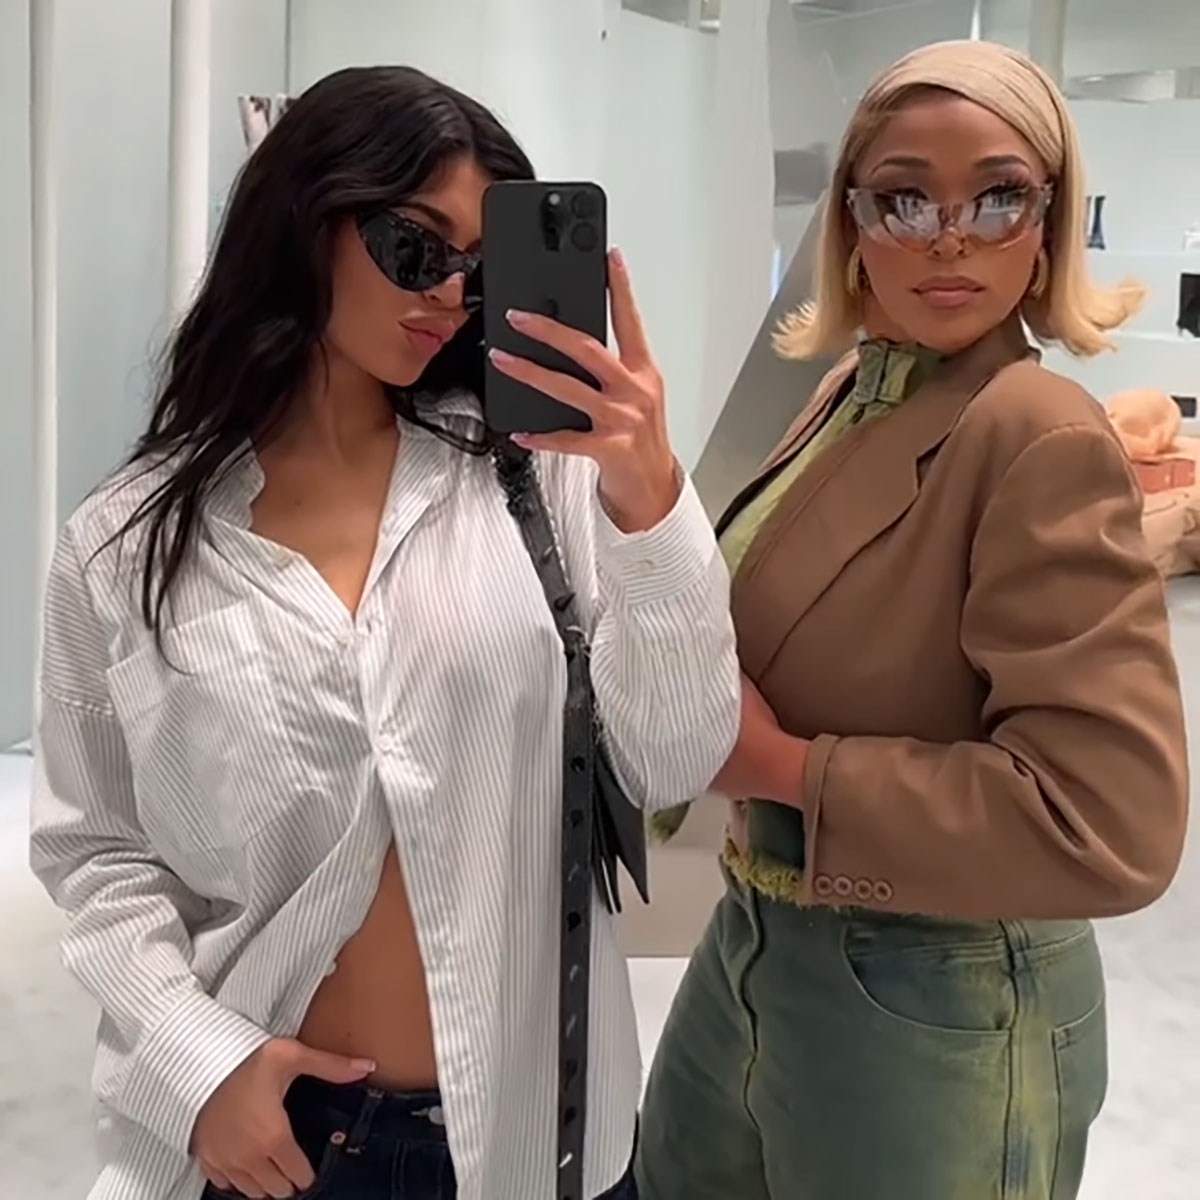 Kylie Jenner Shares Selfie from Public Reunion with Jordyn Woods